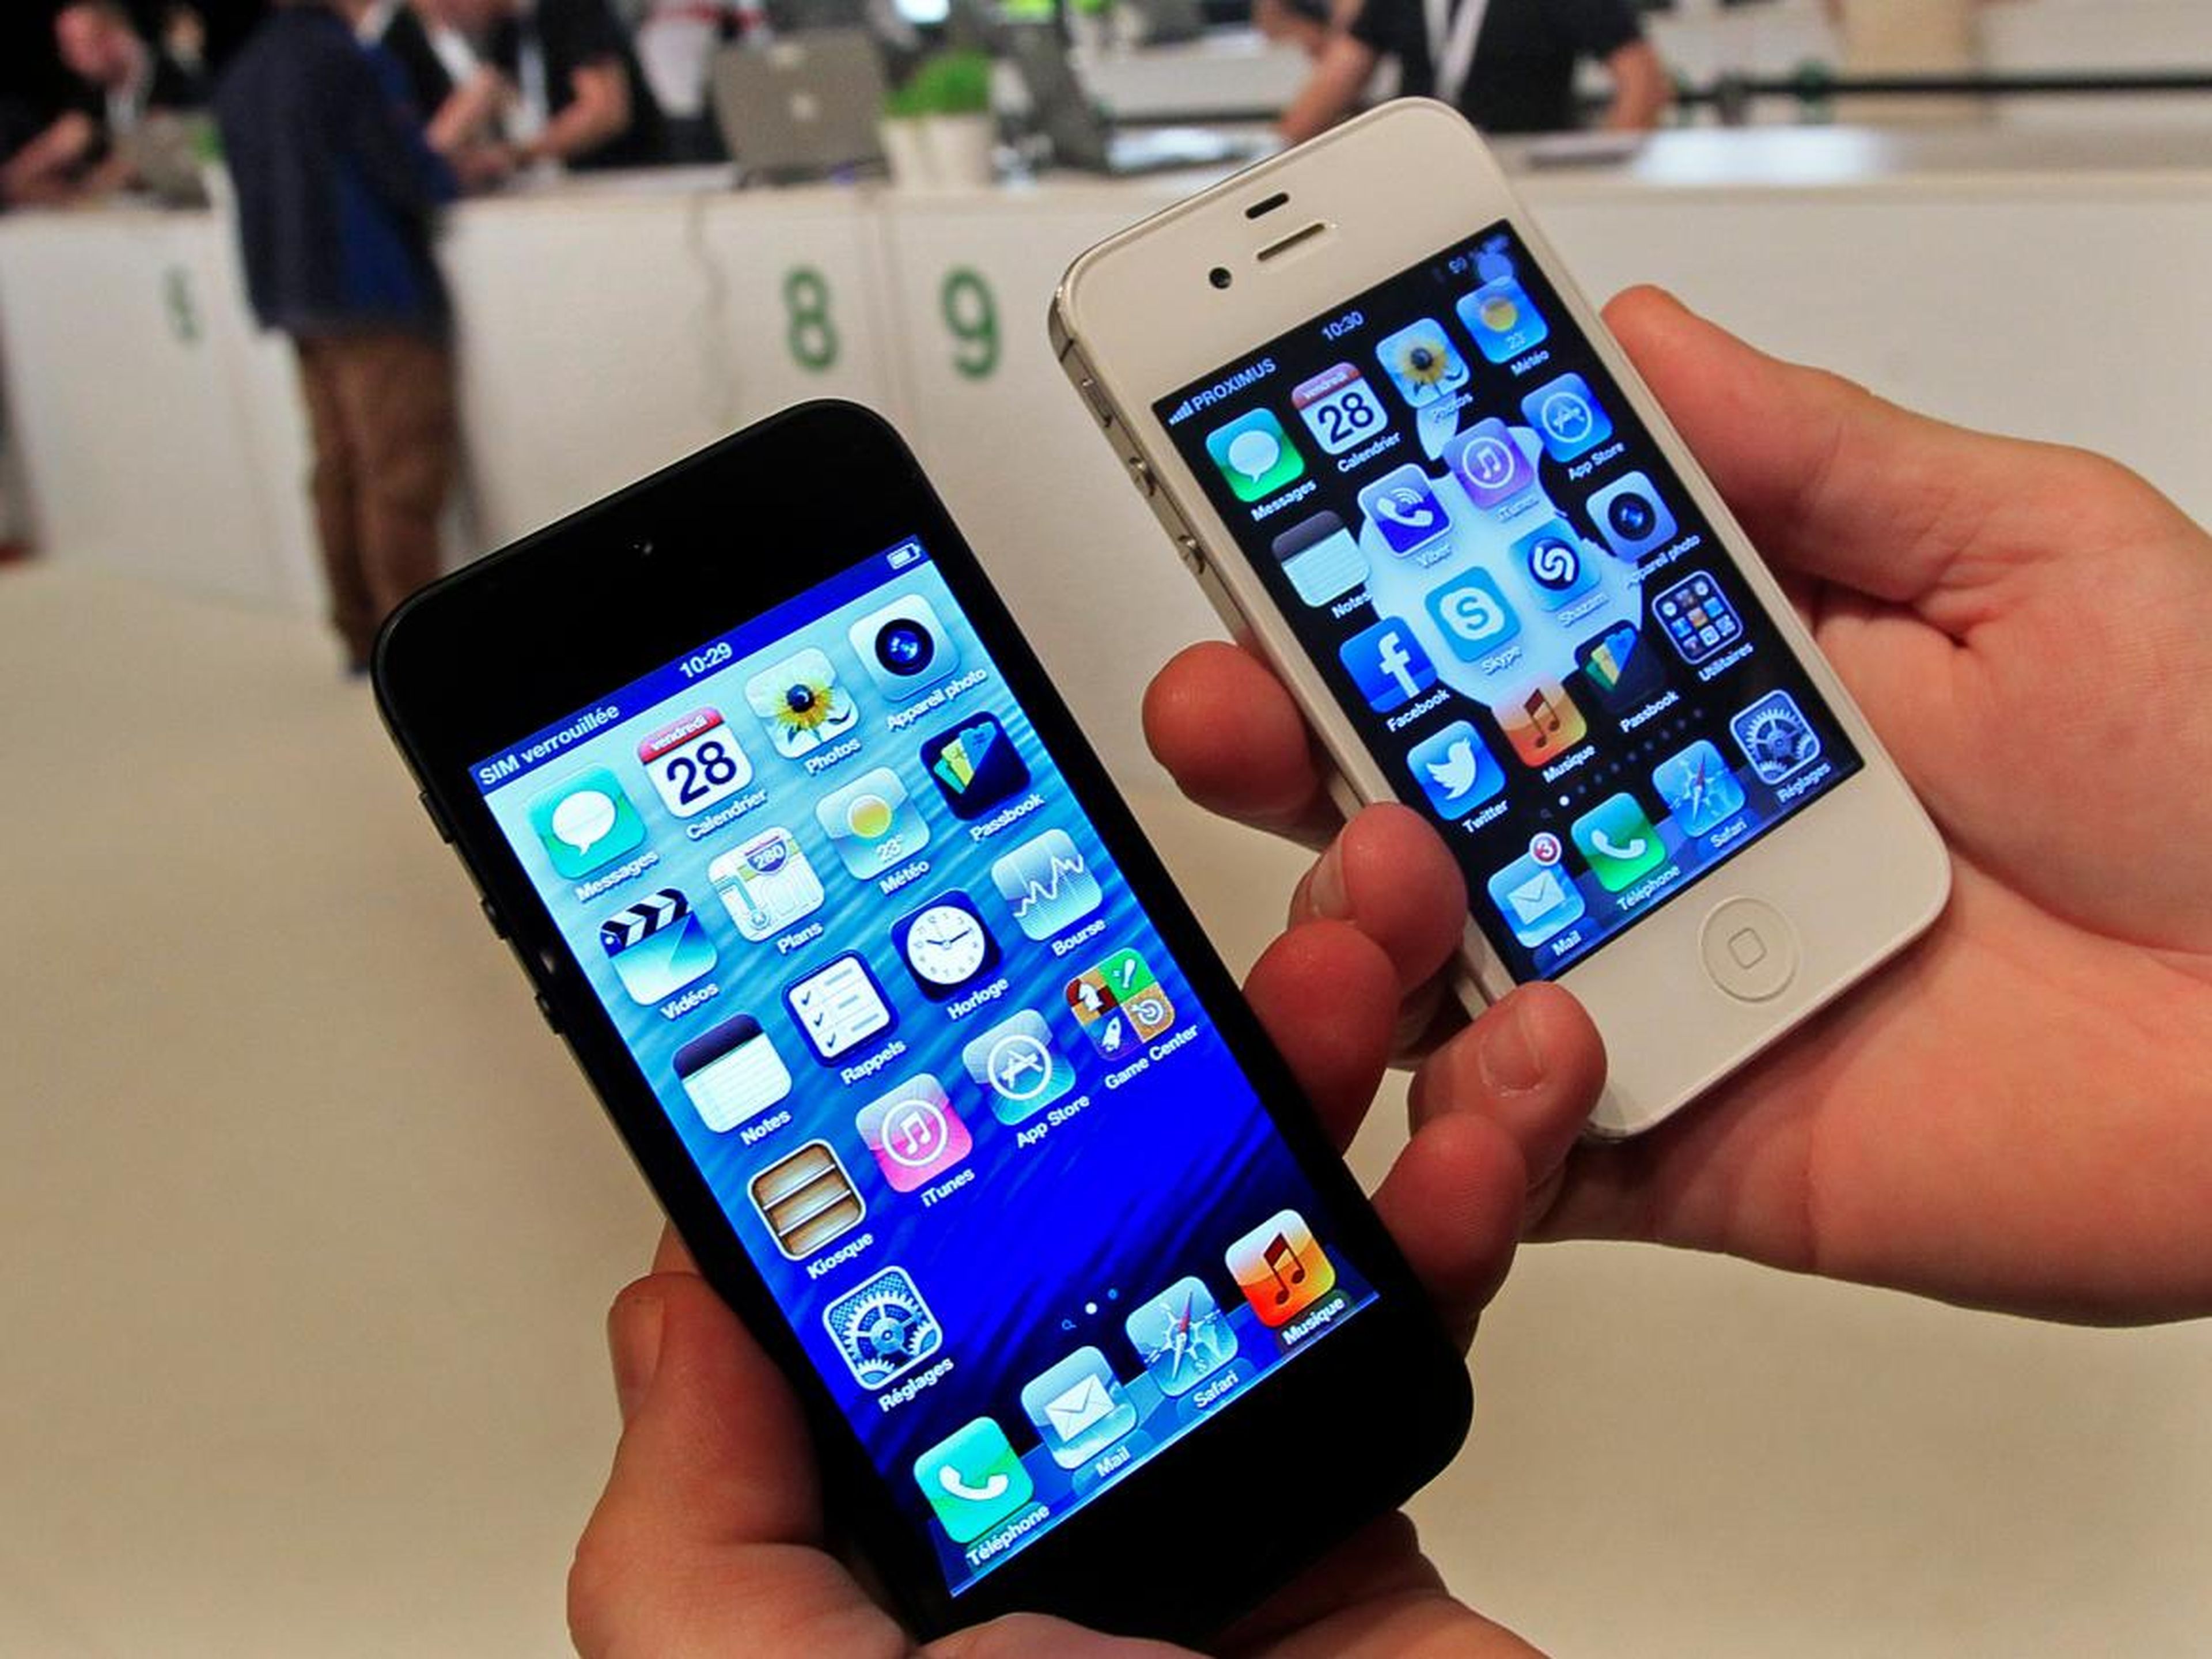 The iPhone 4 and iPhone 5.